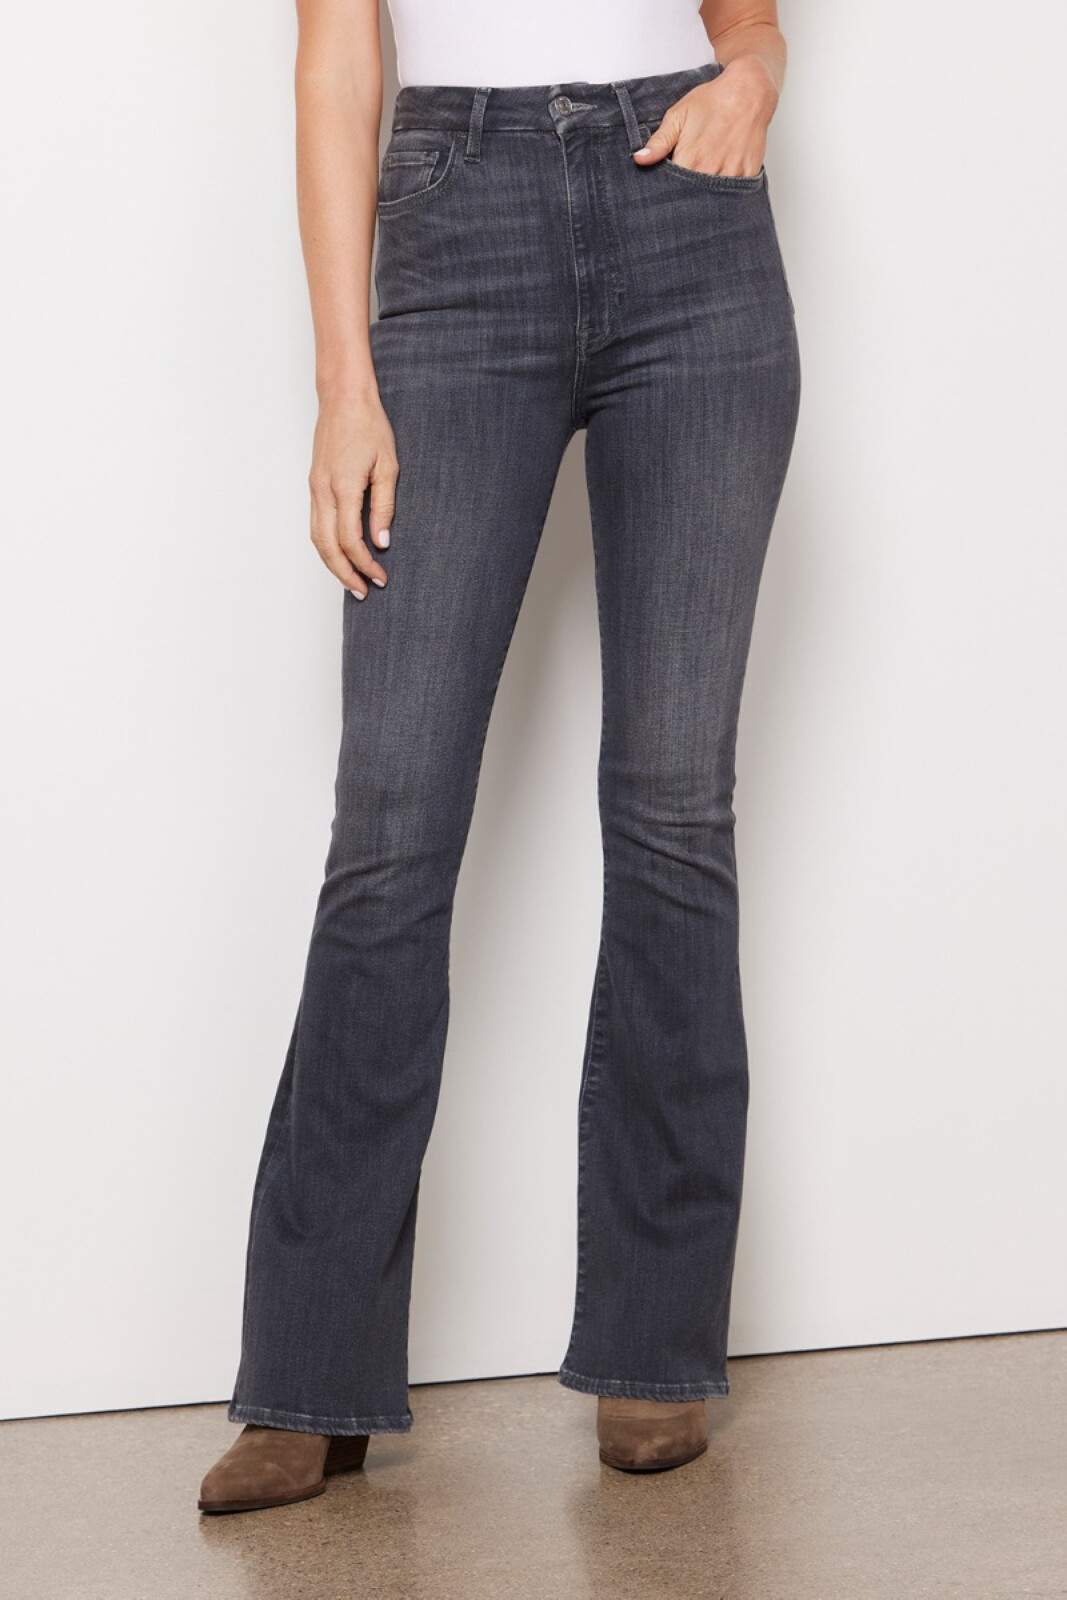 Mid-rise bootcut jeans in grey - 7 For All Mankind